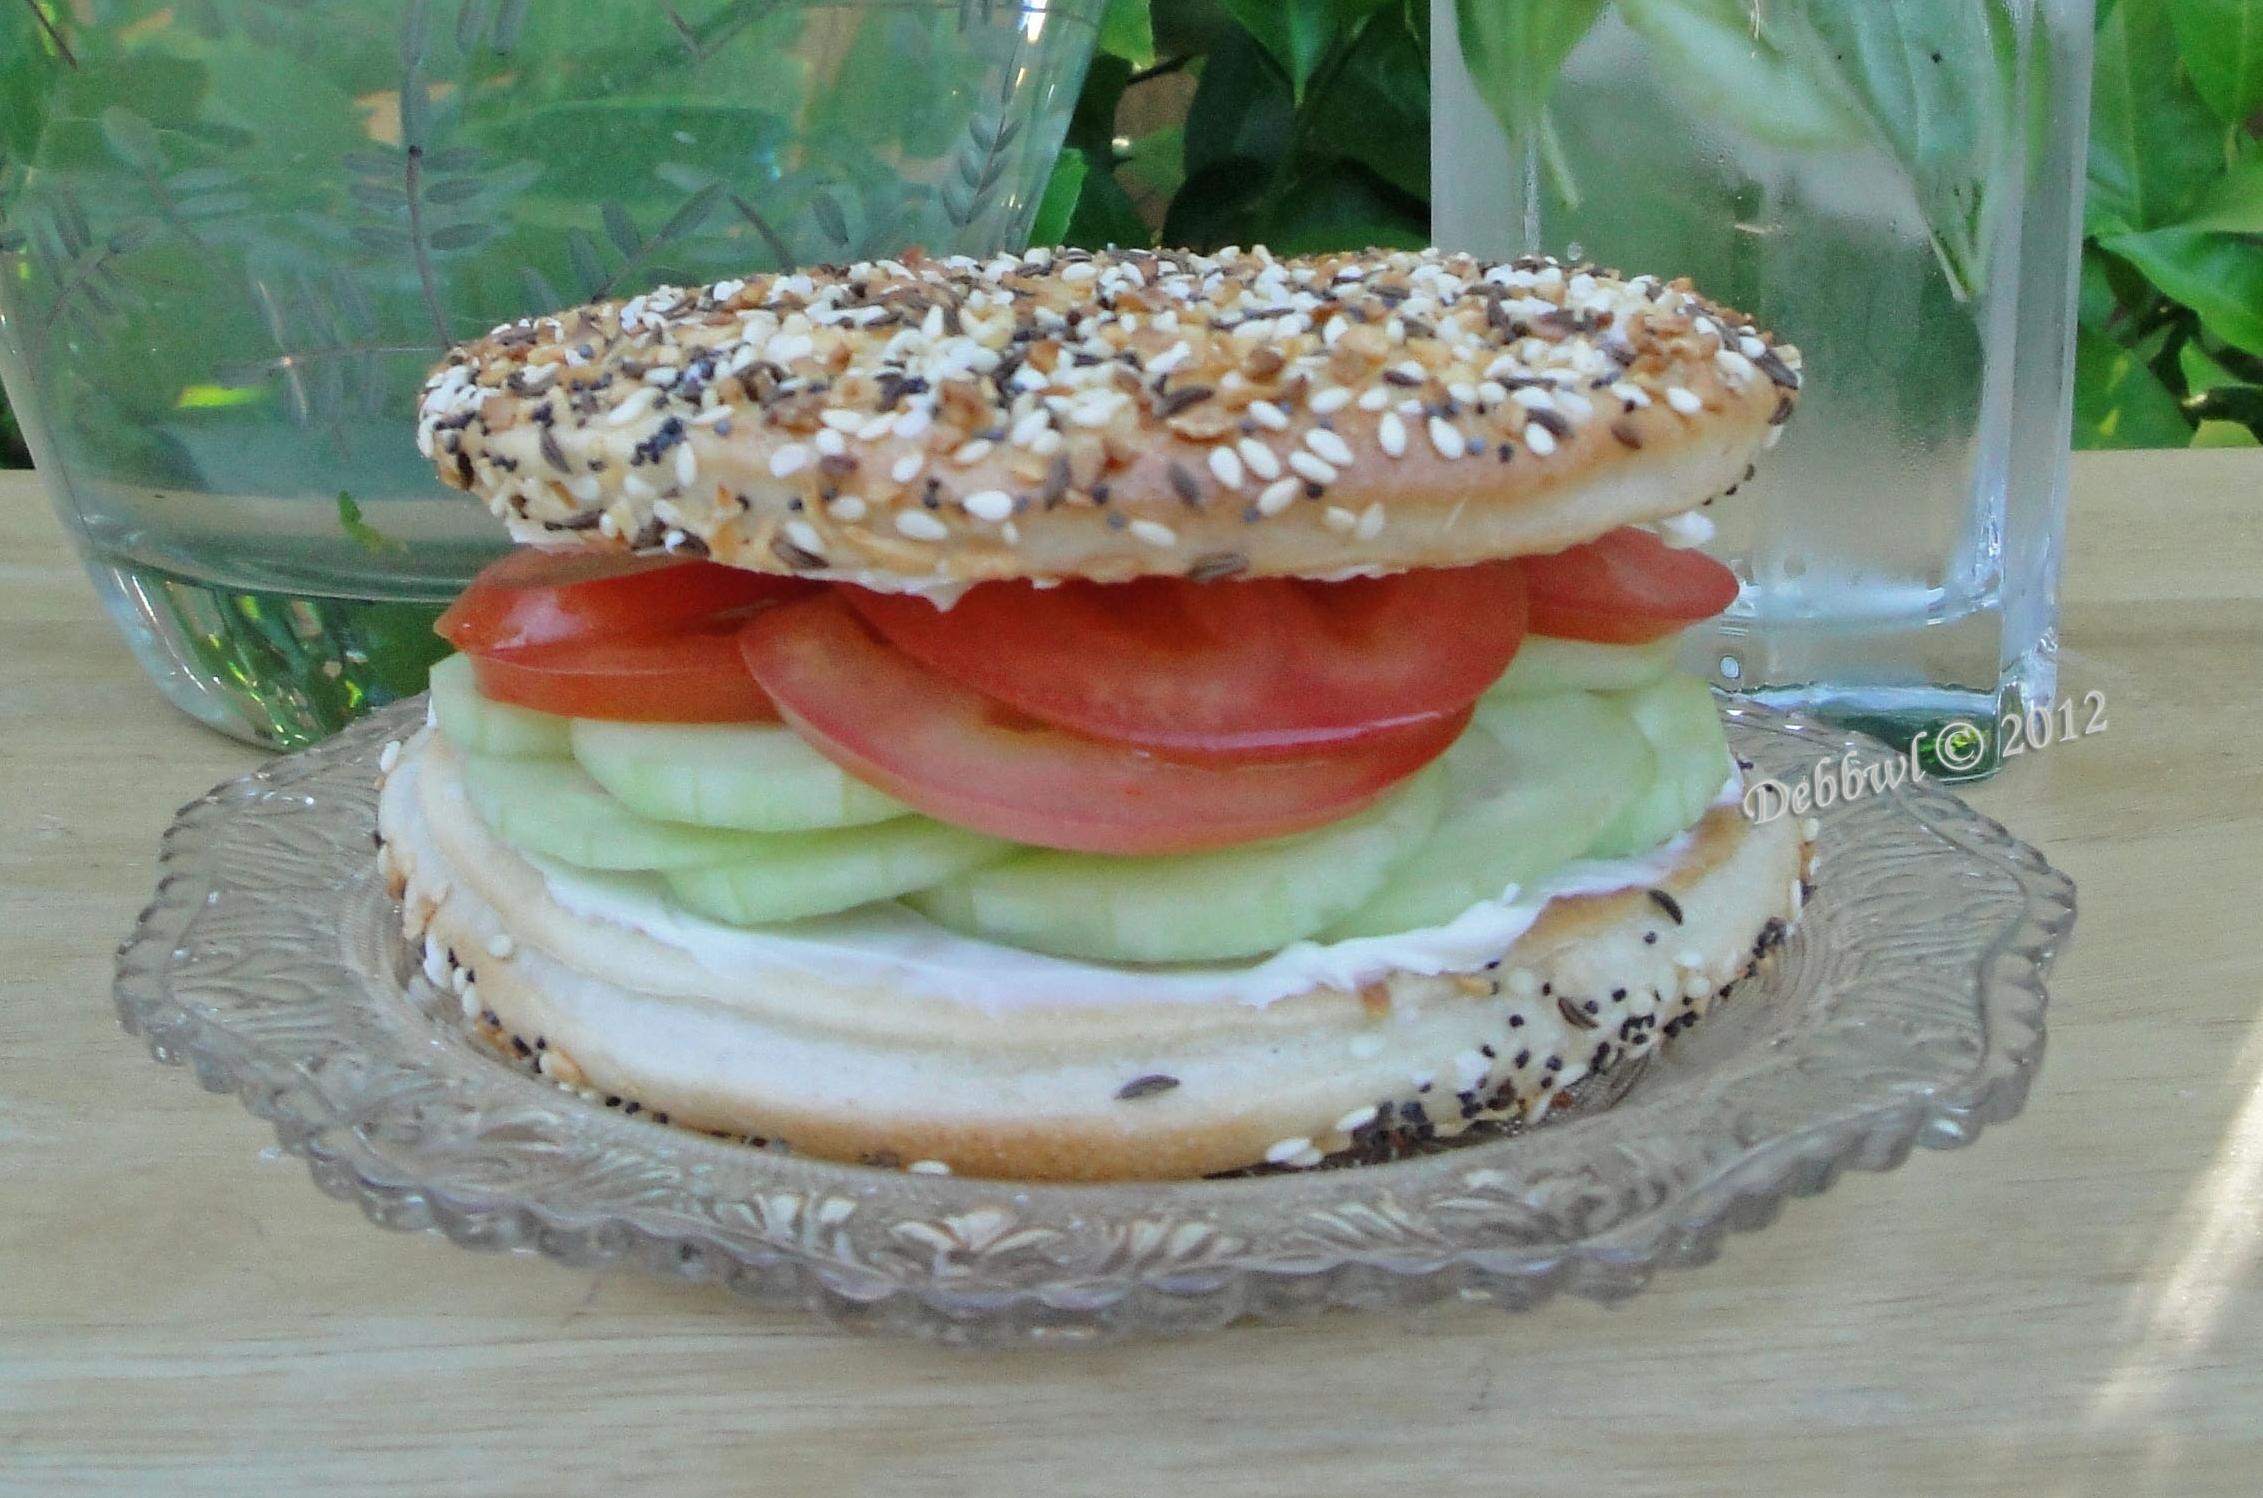  A delicious and colorful vegetarian bagel sandwich perfect for breakfast, lunch or dinner.